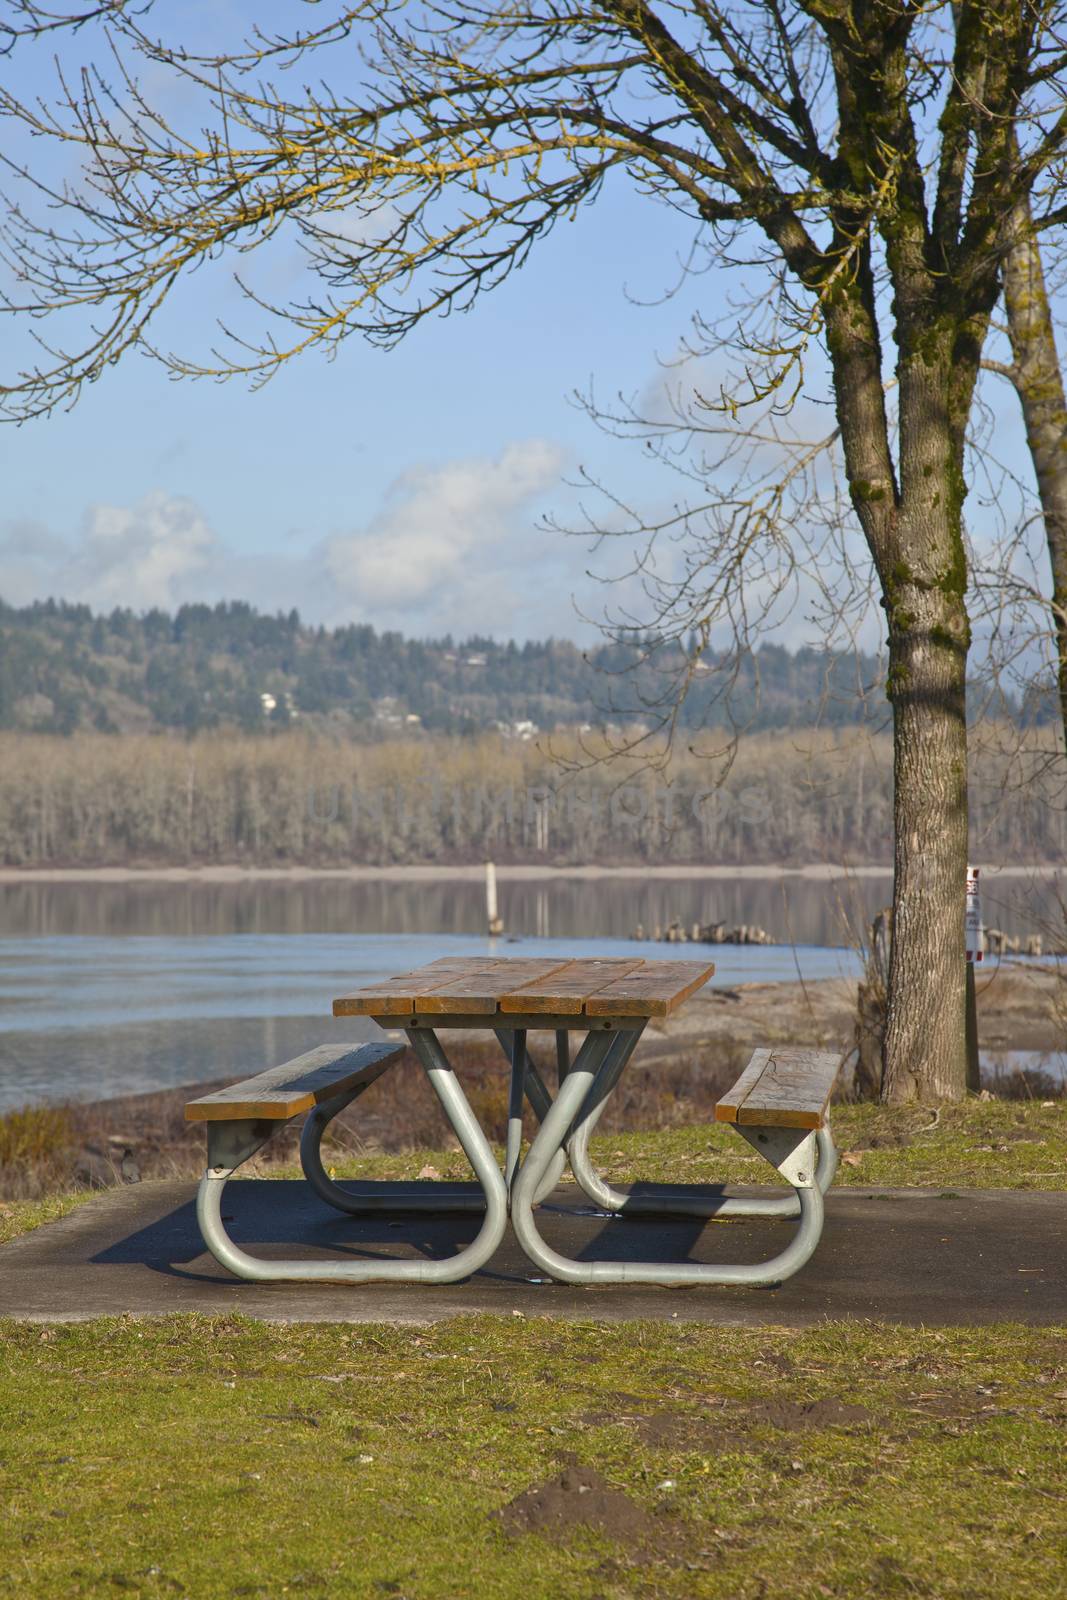 Picnic bench with a view Columbia river Oregon parks.